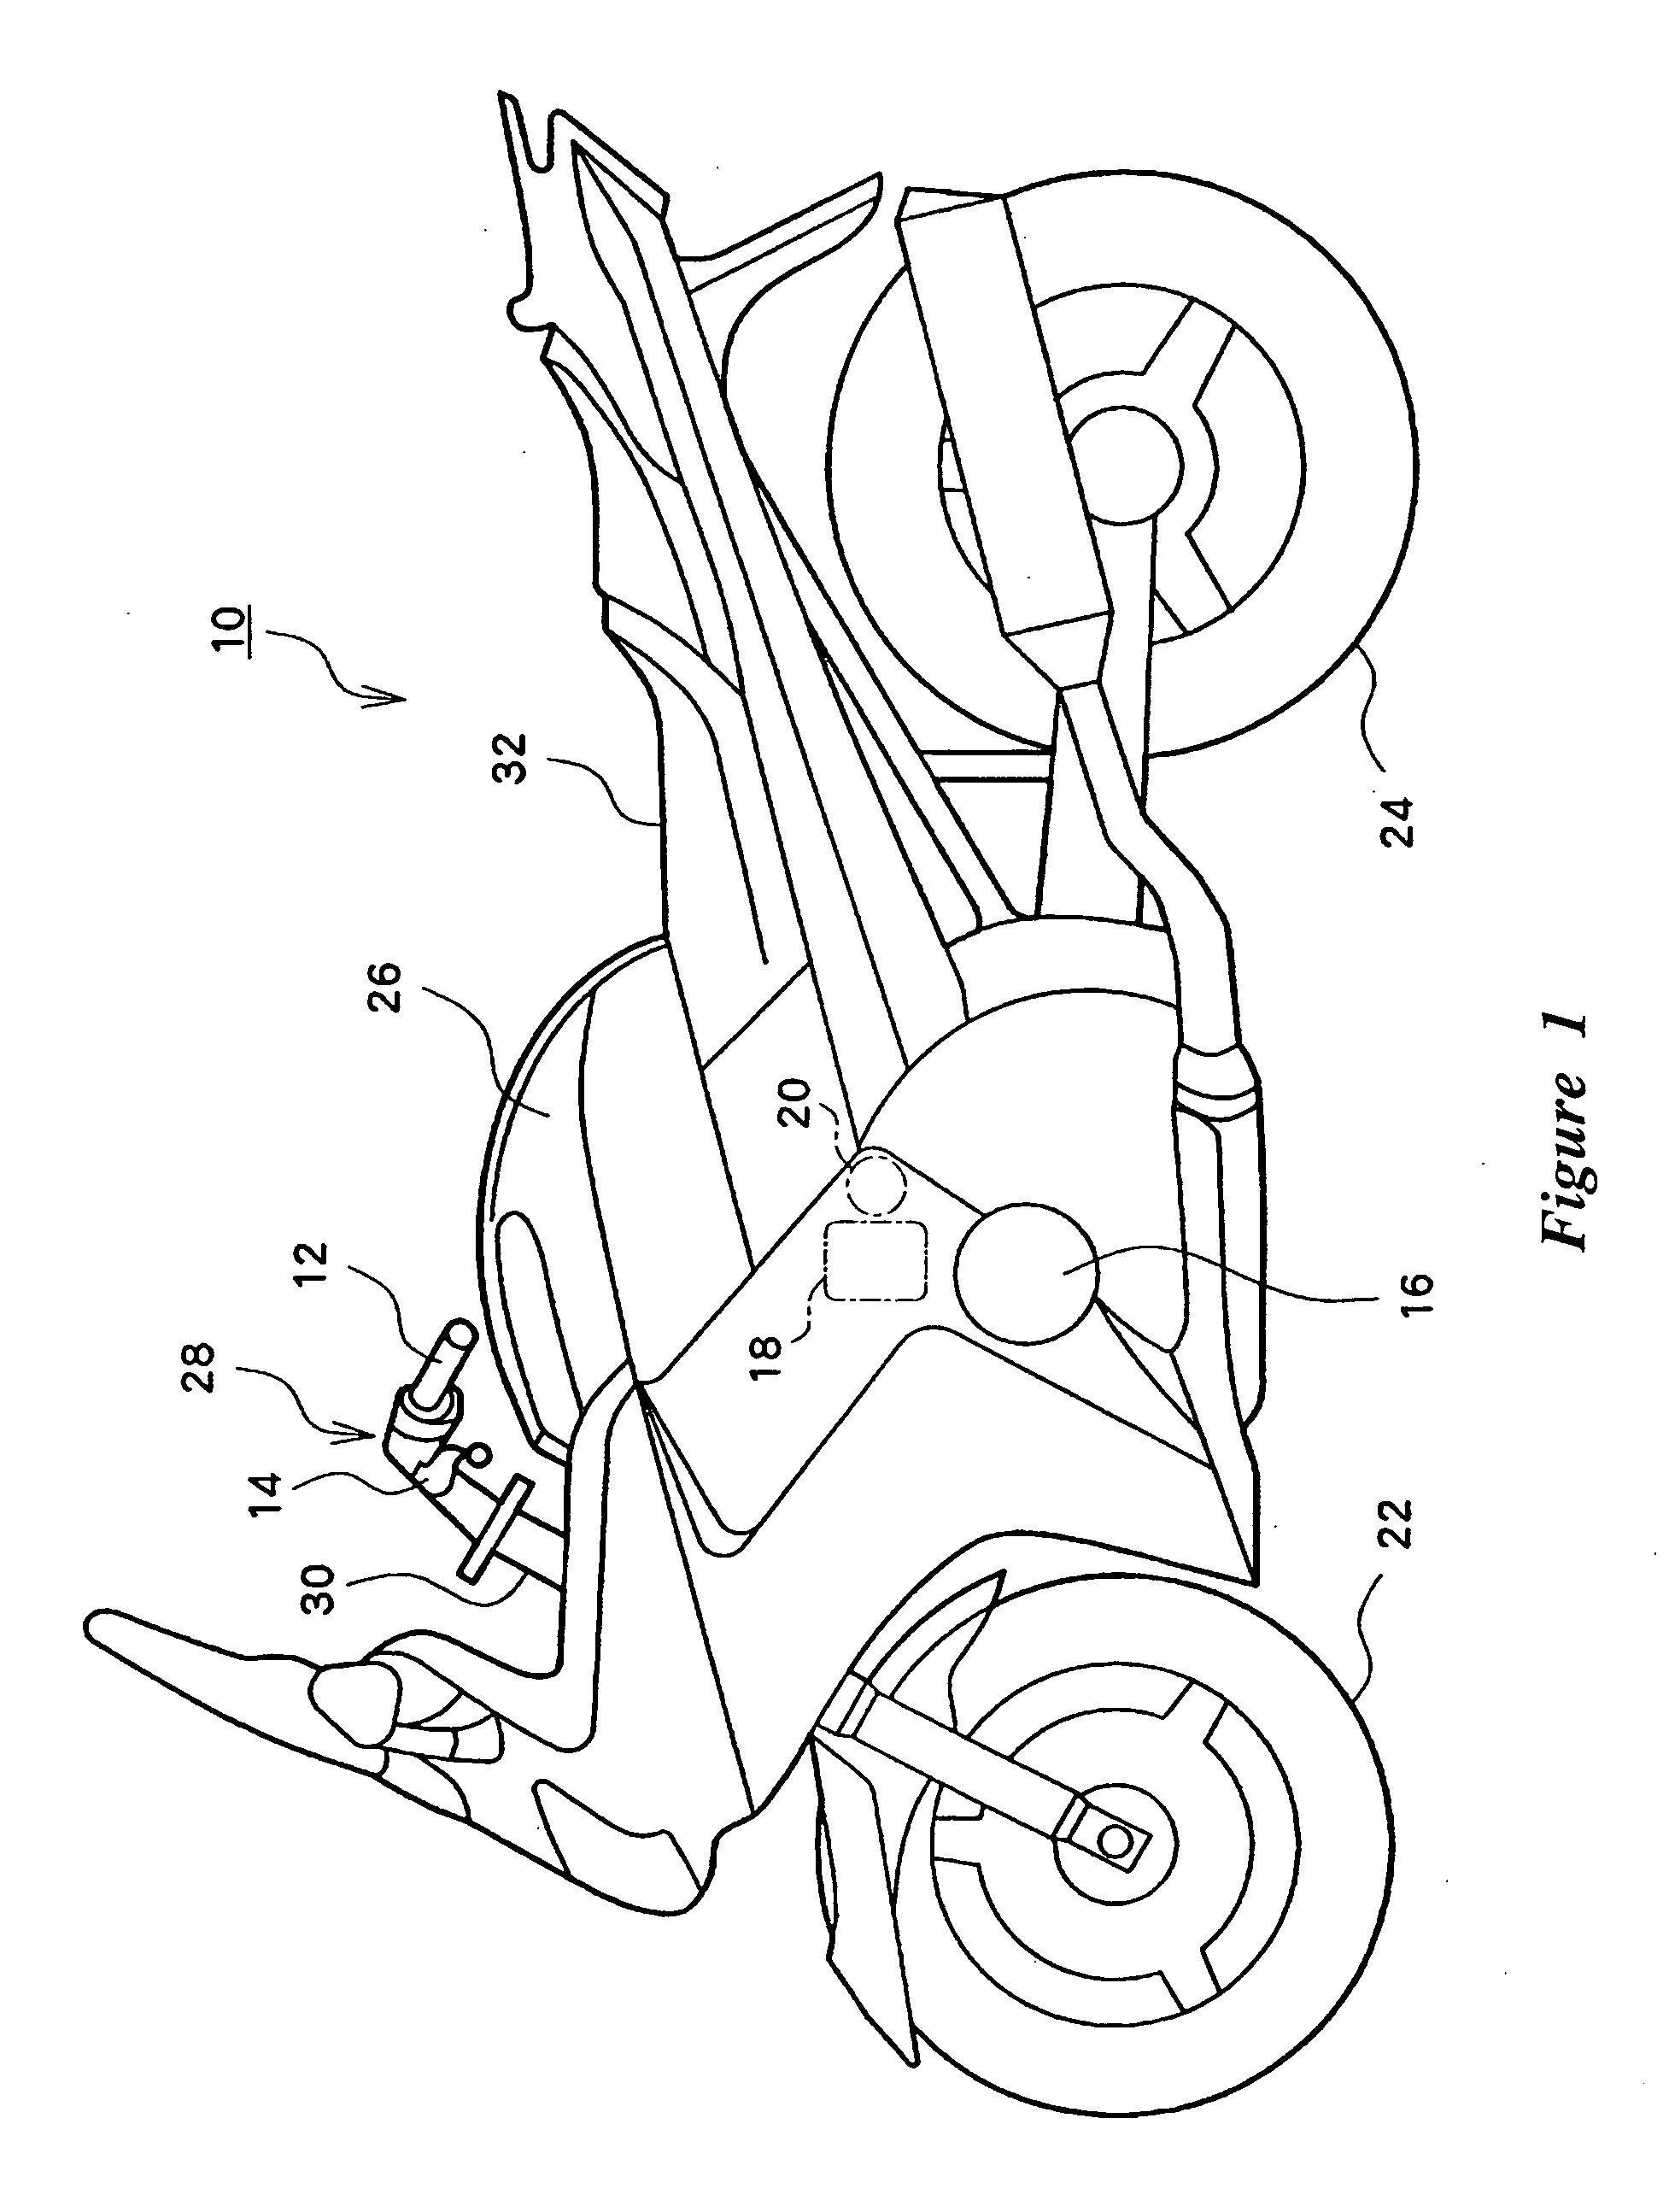 Gear change control device and method